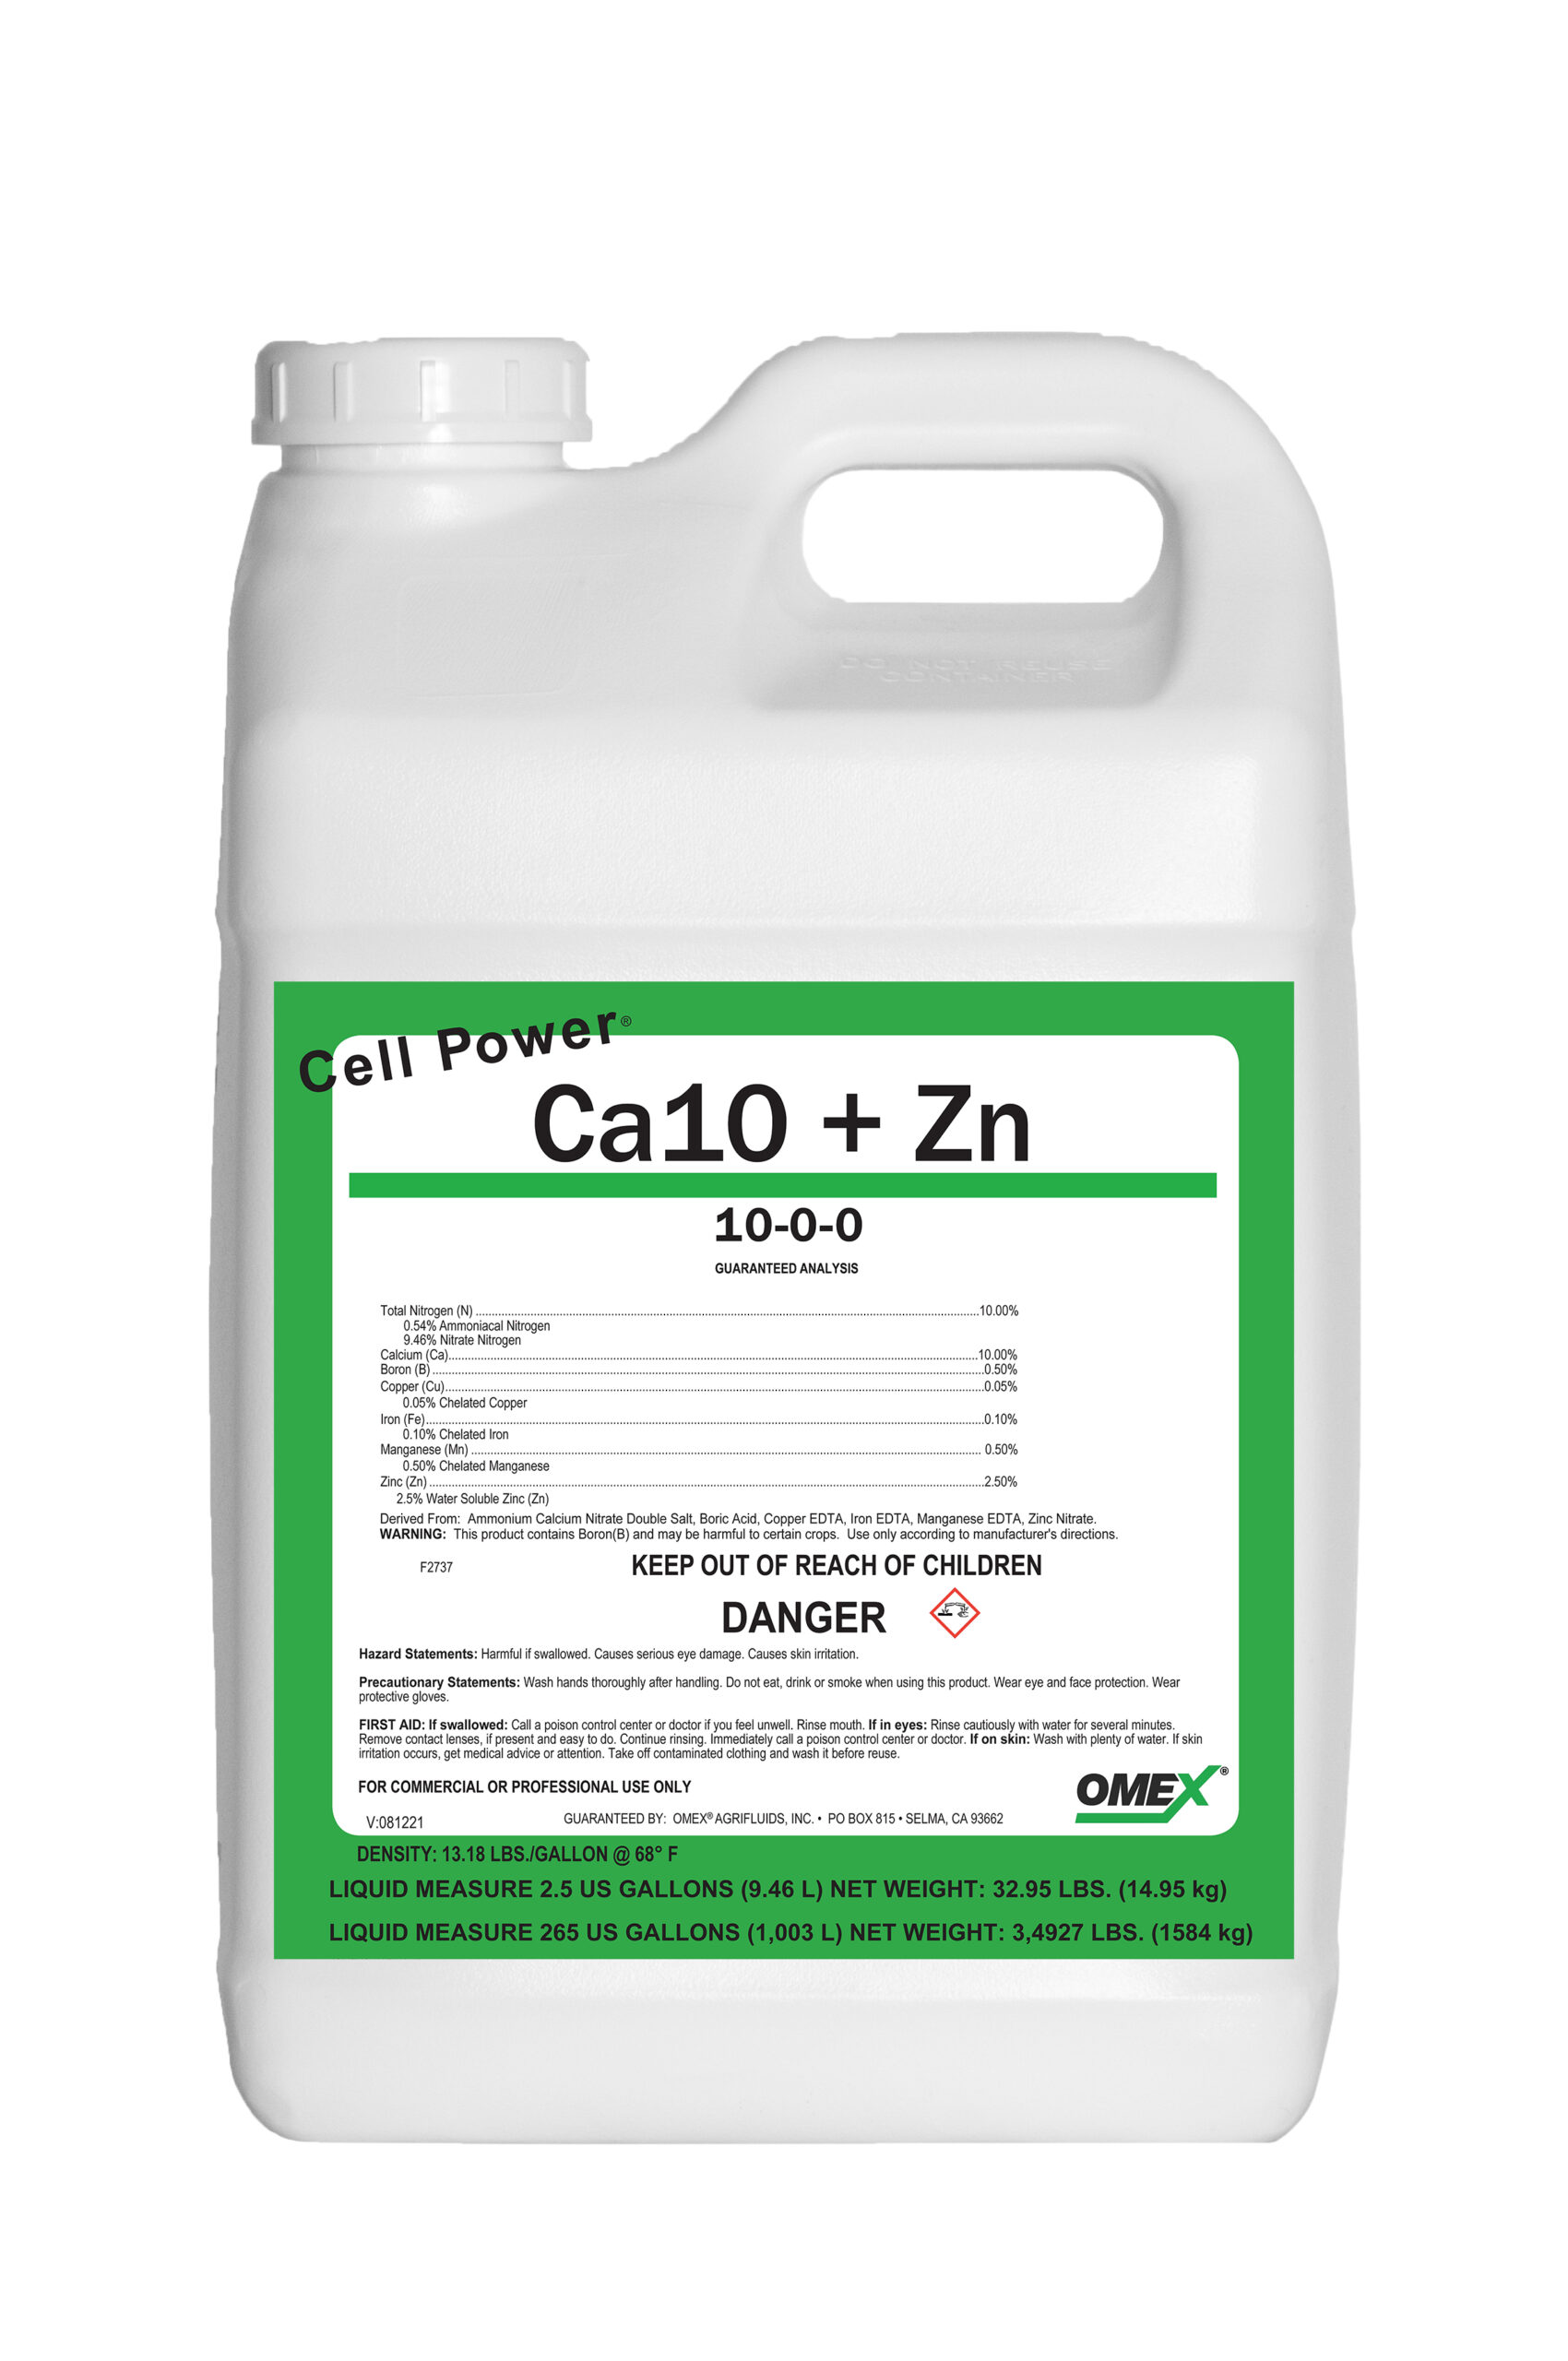 CELL POWER® Ca10 + Zn 10-0-0